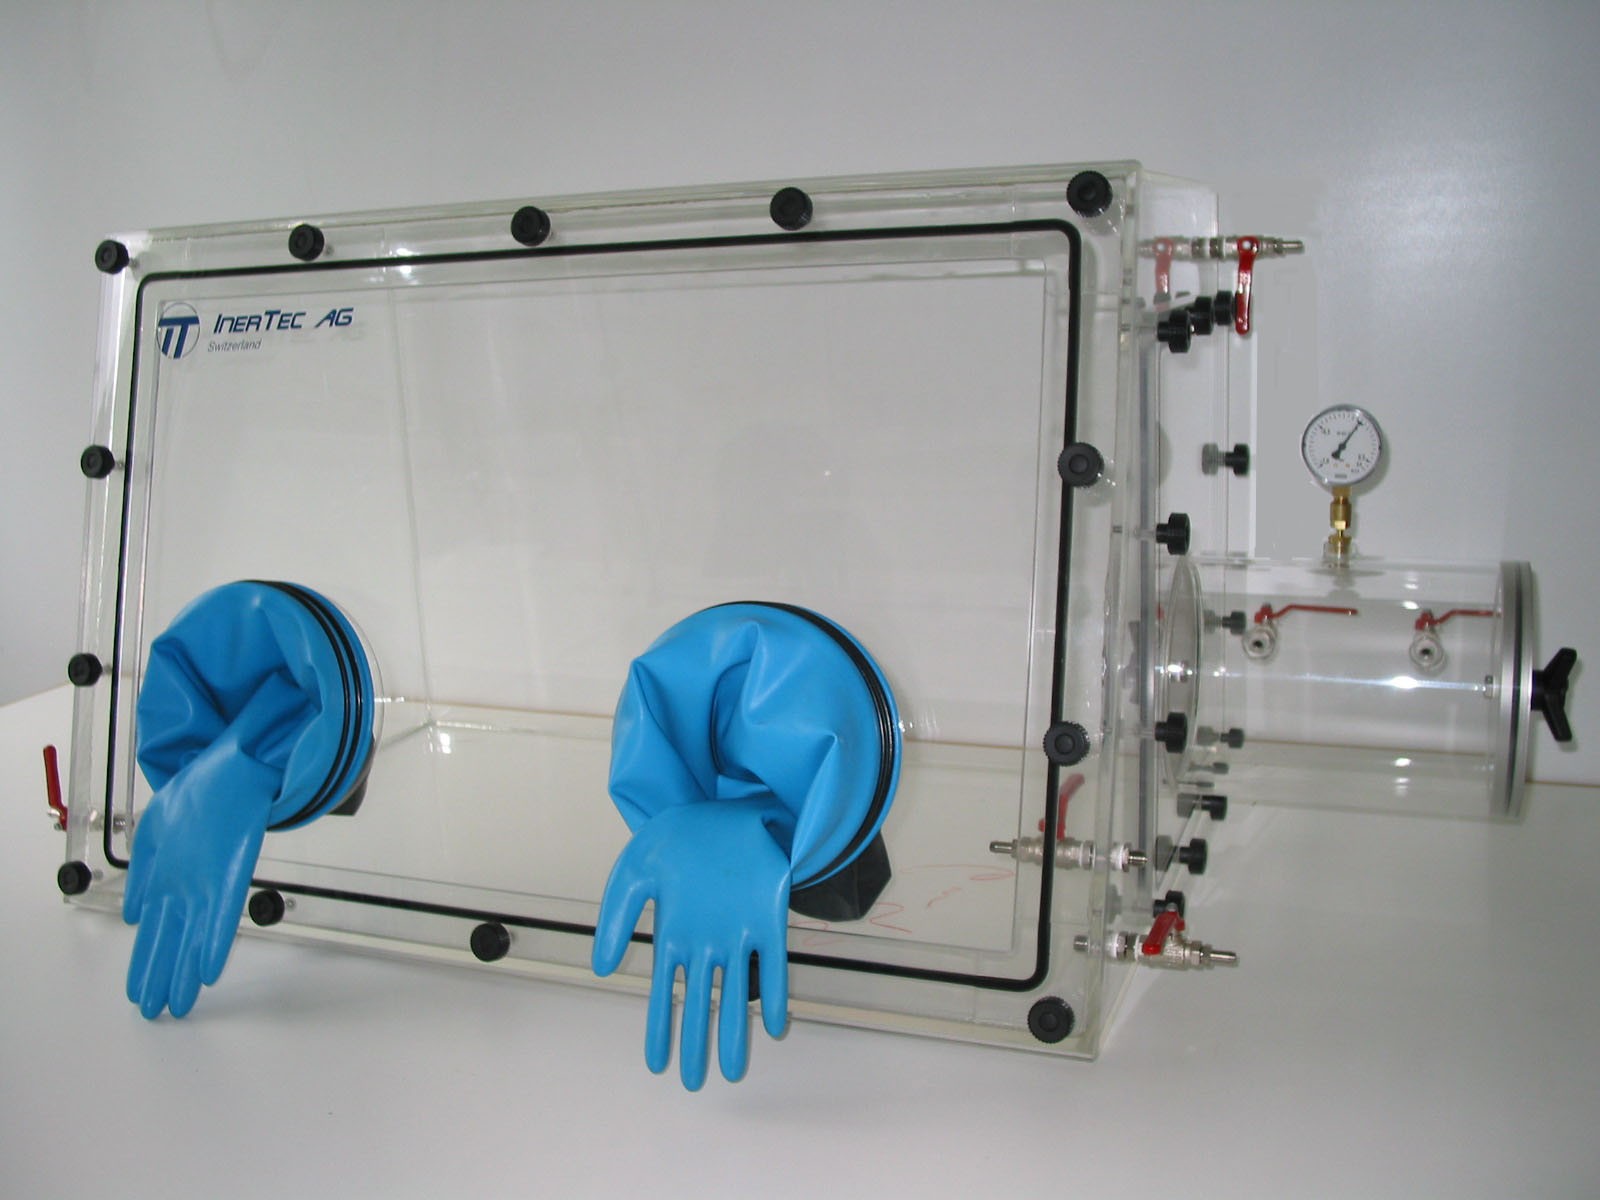 Glovebox made of acrylic&gt; Gas filling: automatic flushing with pressure control, front version: standard, side version: removable flange Control: oxygen regulator and humidity display with data logger